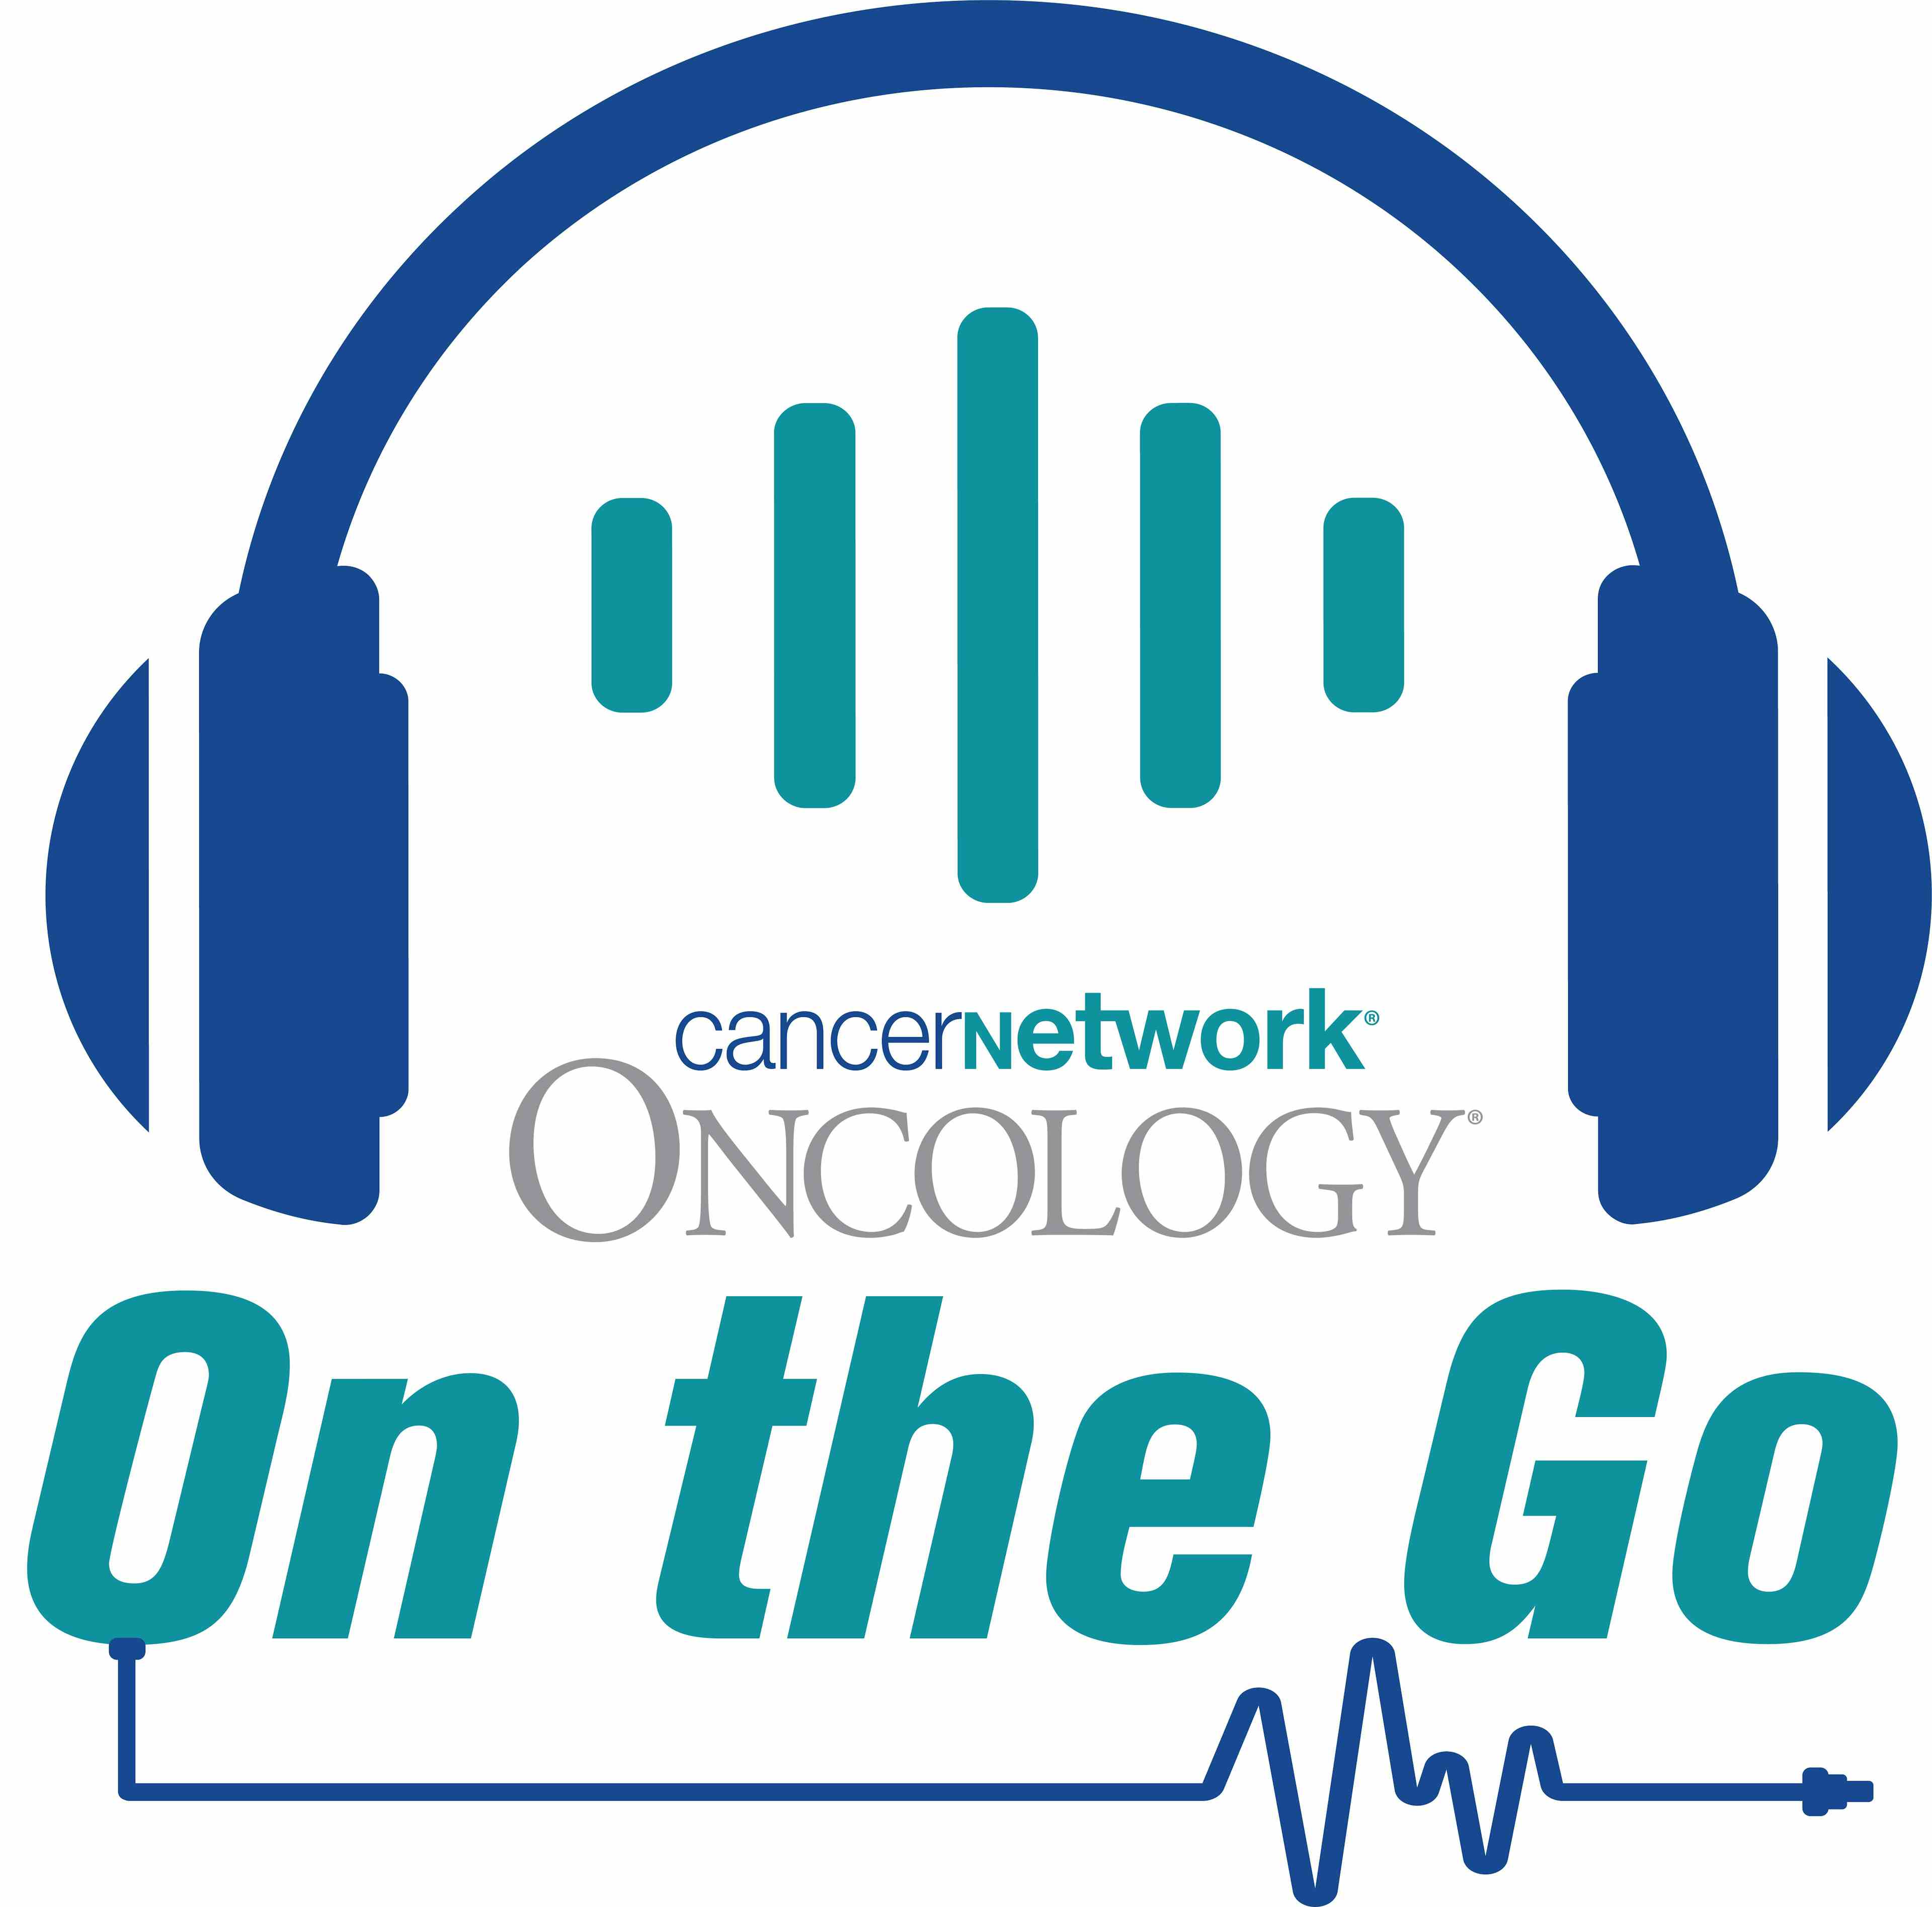 Practices are on the cusp of better understanding small cell lung cancer that in turn can help to advance treatment strategies for patients, says Gregory Peter Kalemkerian, MD.